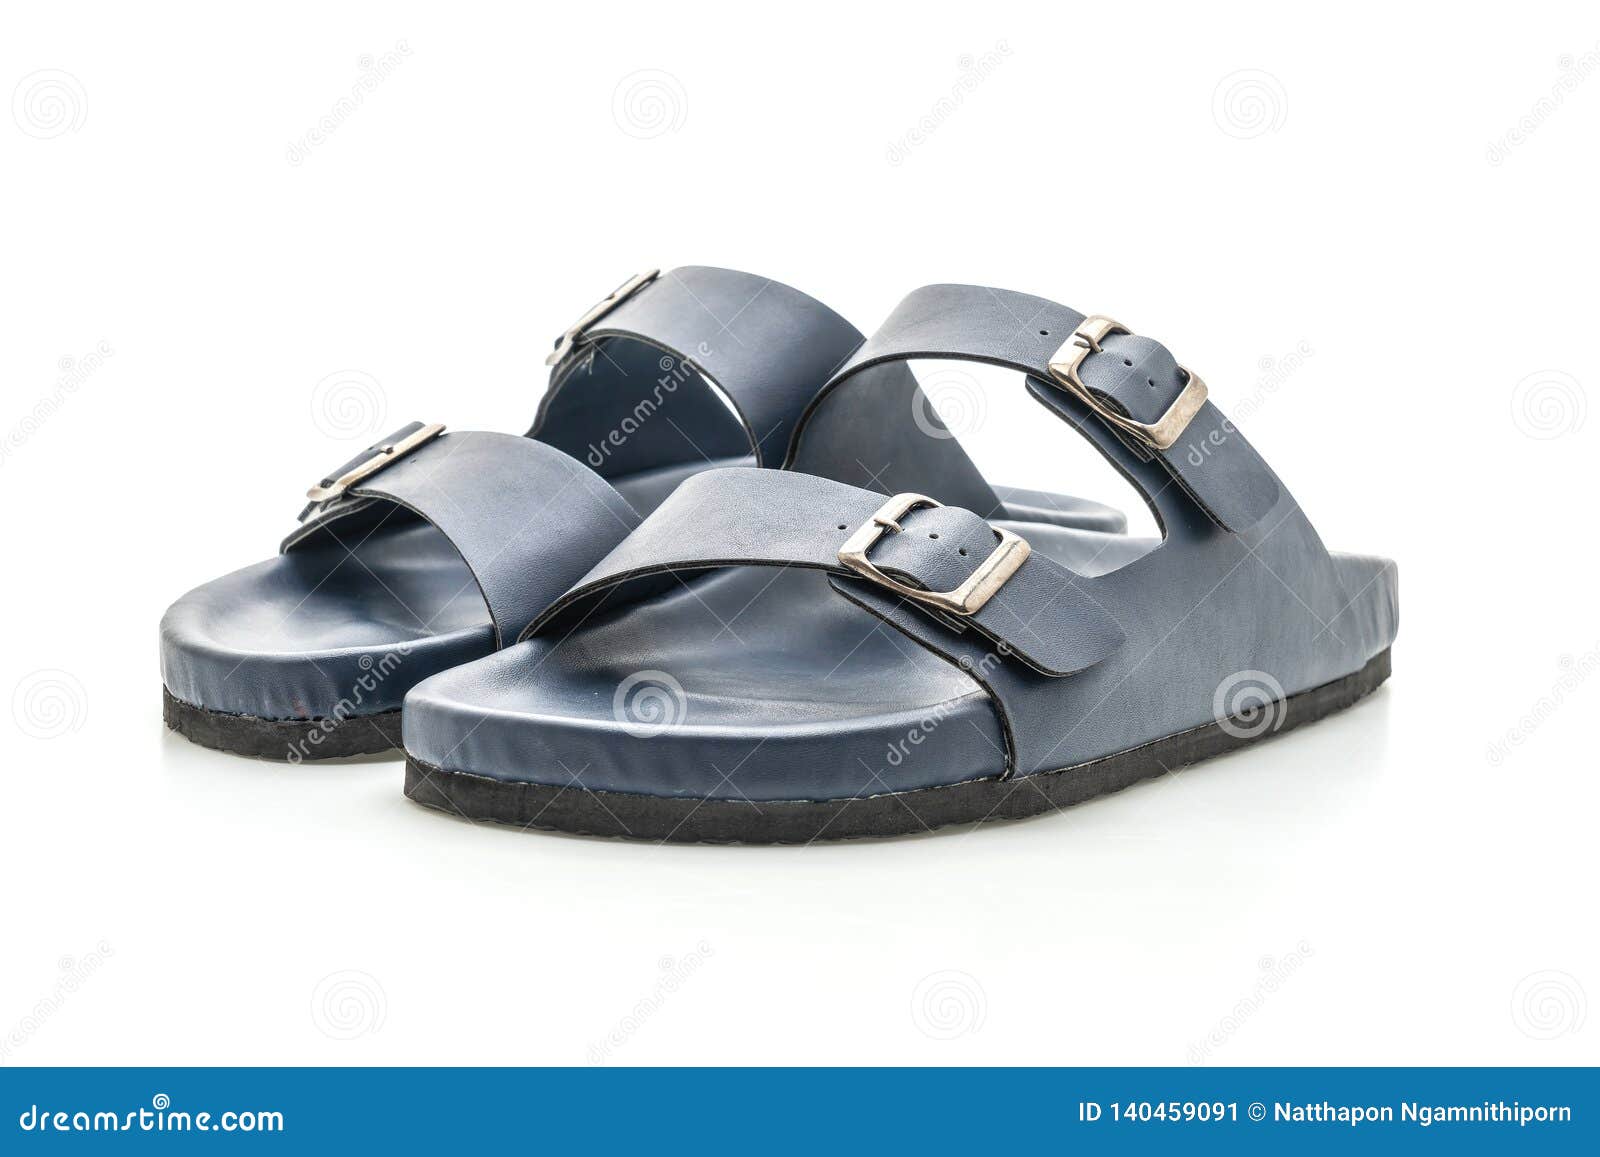 Men leather sandals stock image. Image of brown, shoe - 140459091